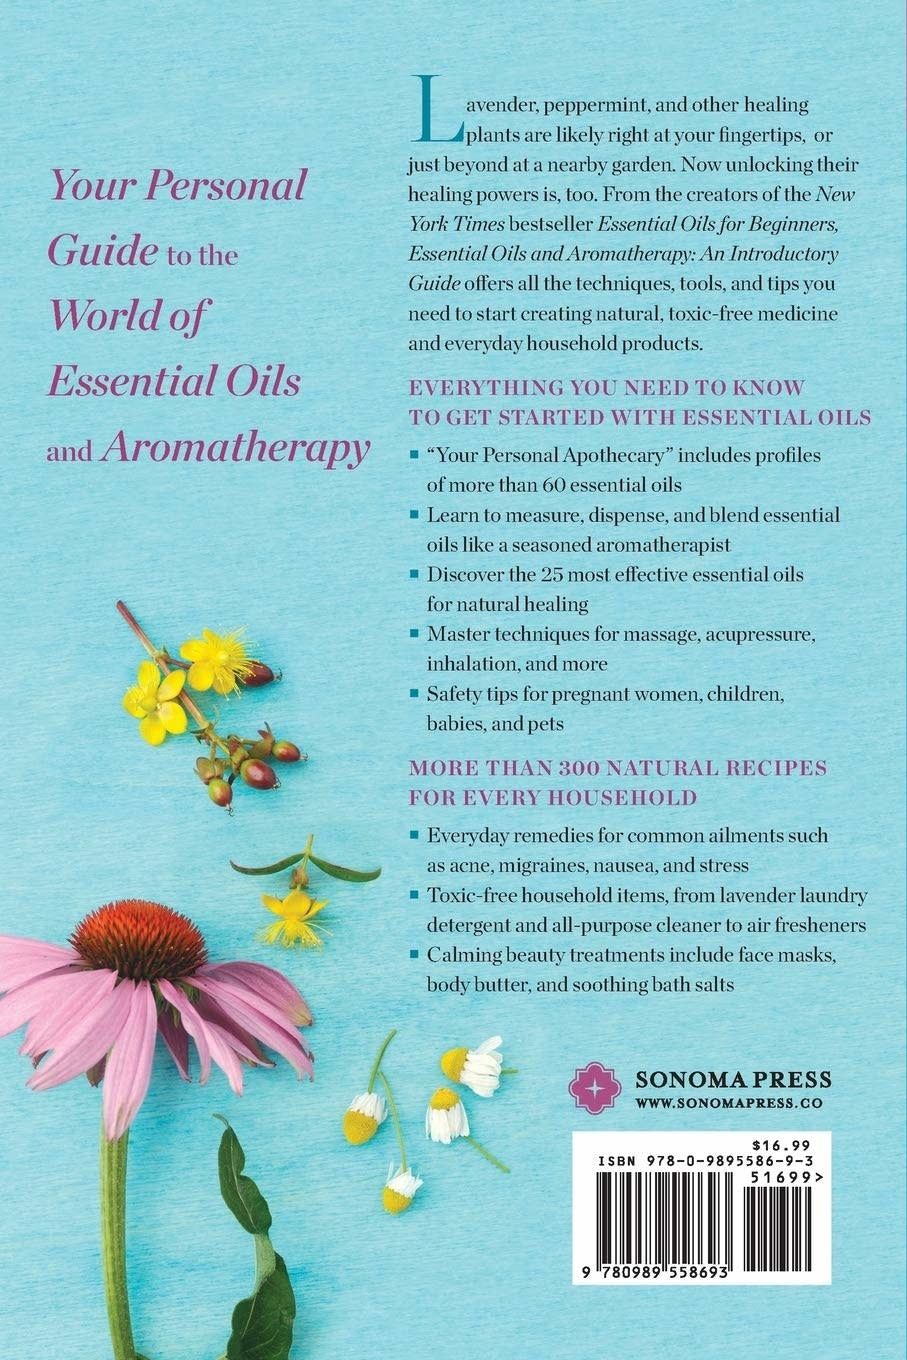 Essential Oils & Aromatherapy, an Introductory Guide: More Than 300 Recipes for Health, Home and Beauty - Sonoma Press